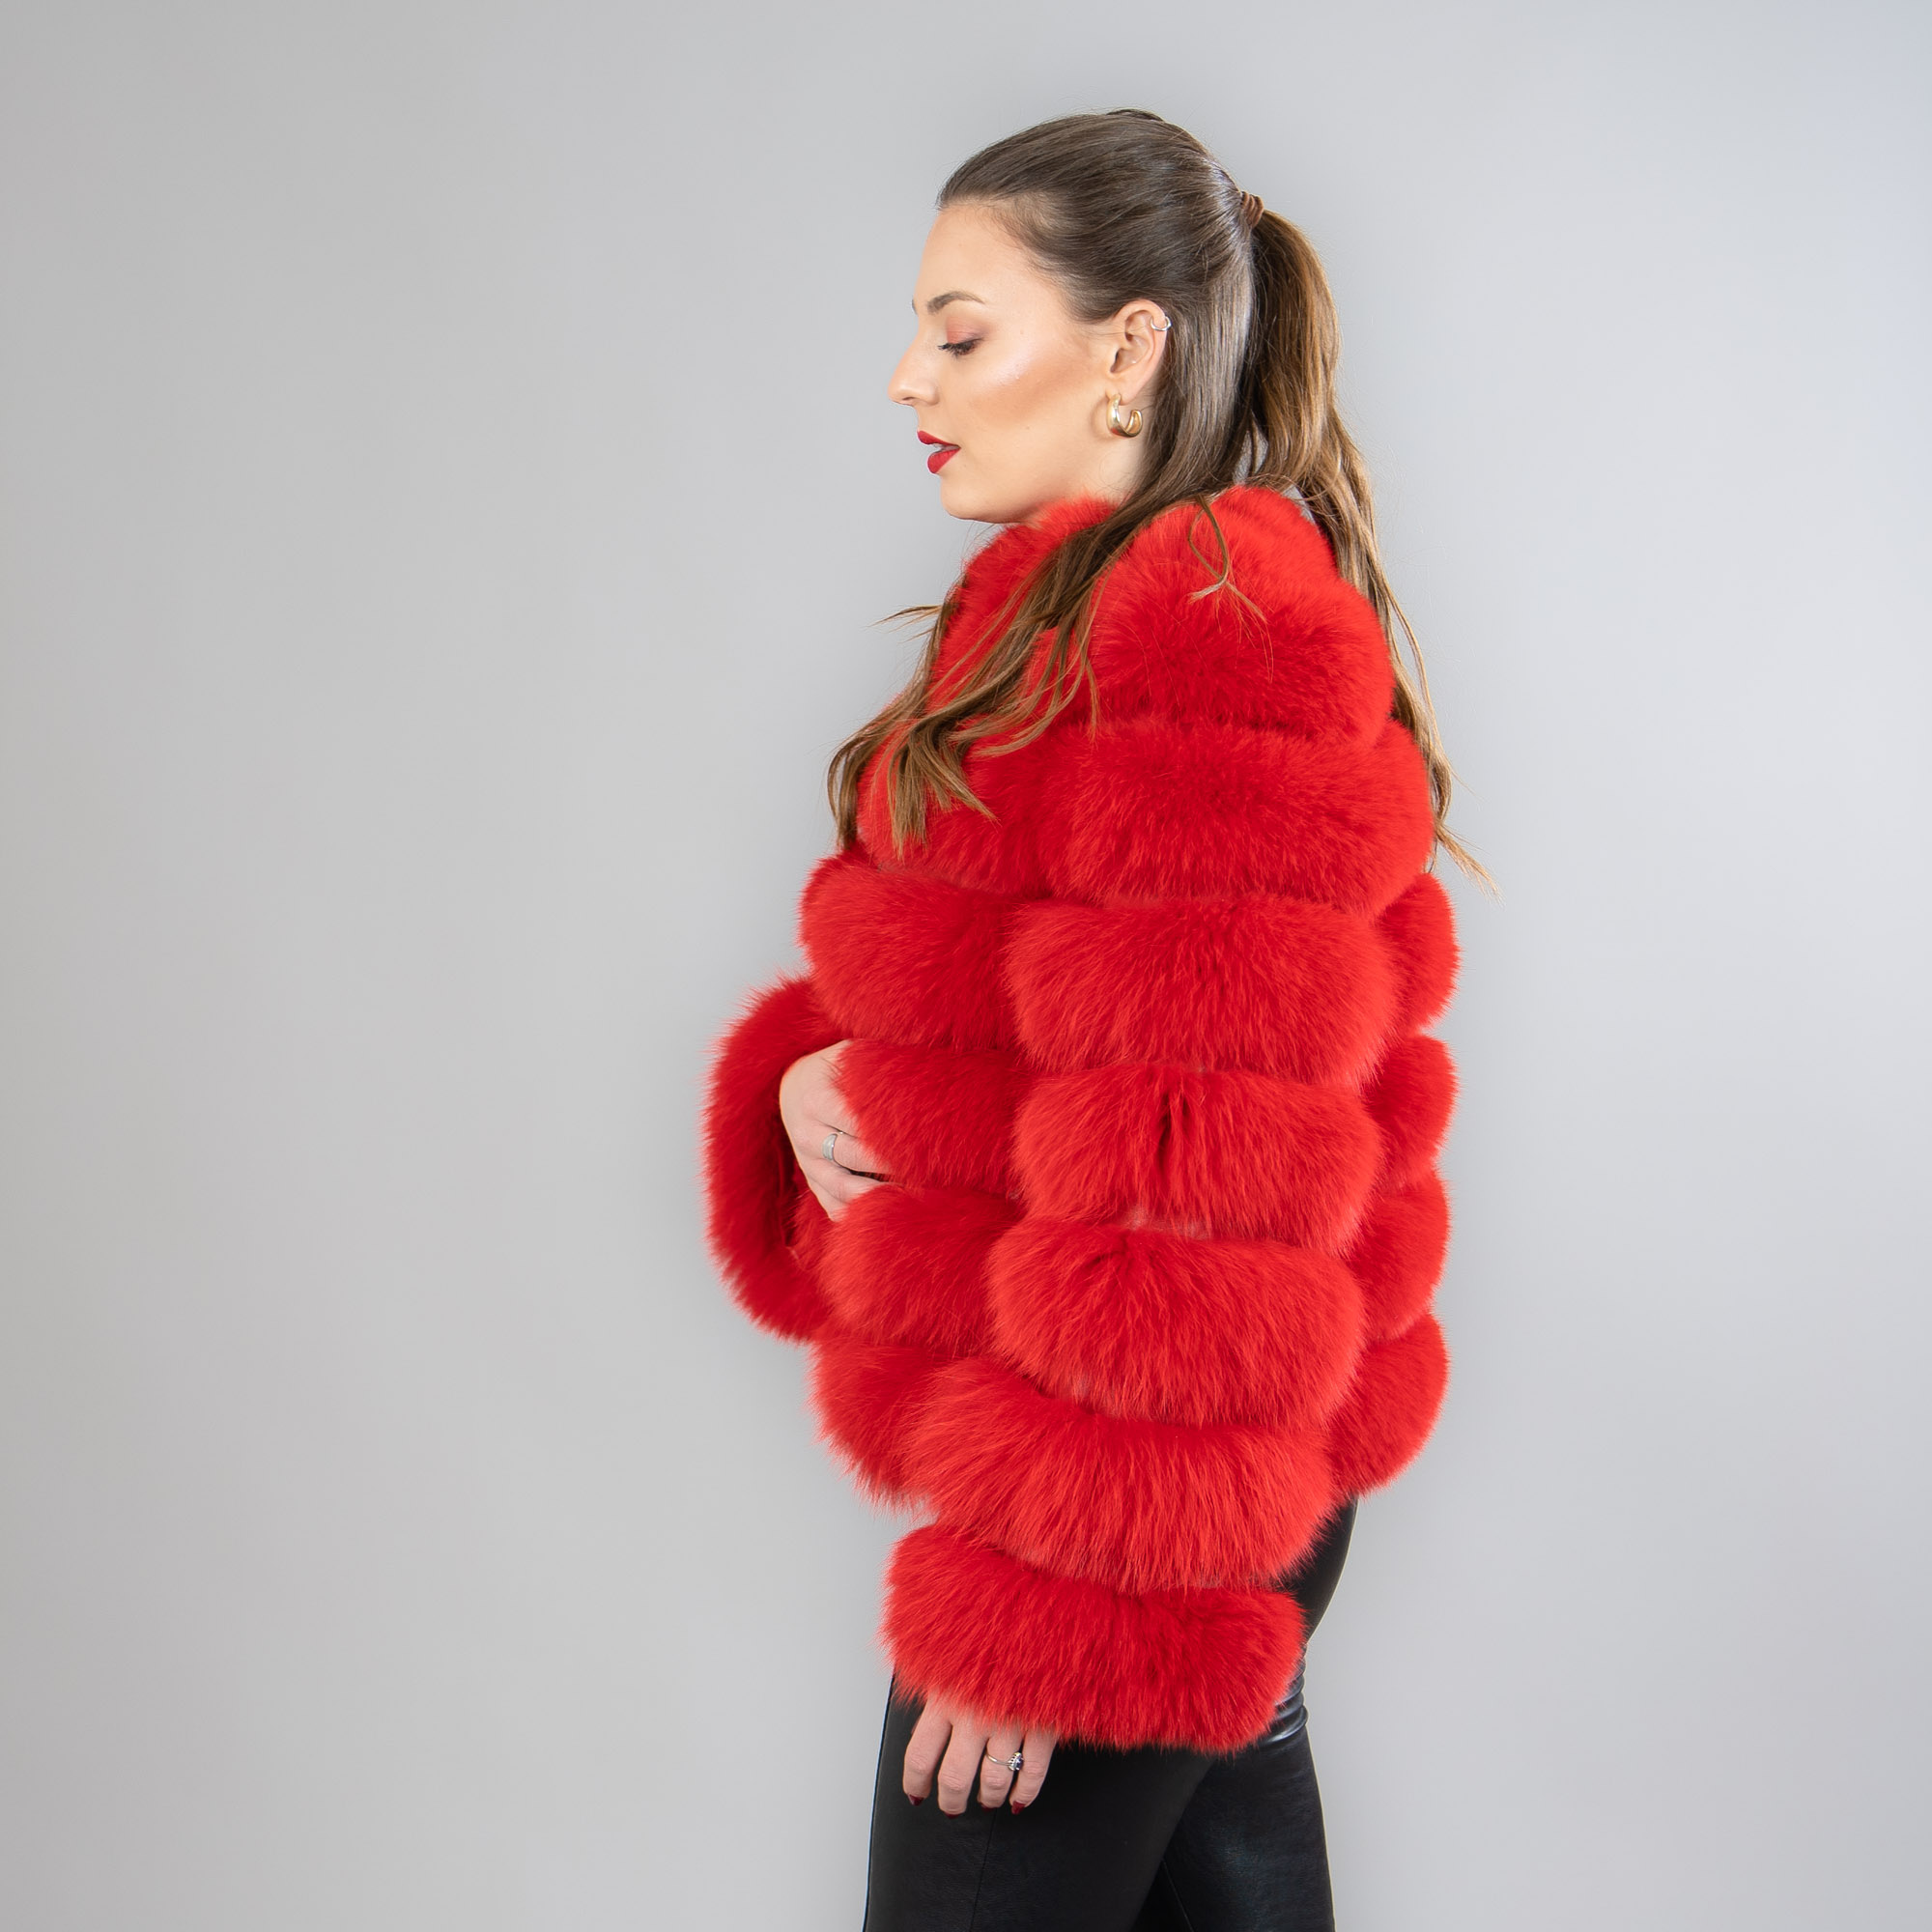 Red fox fur jacket with leather details